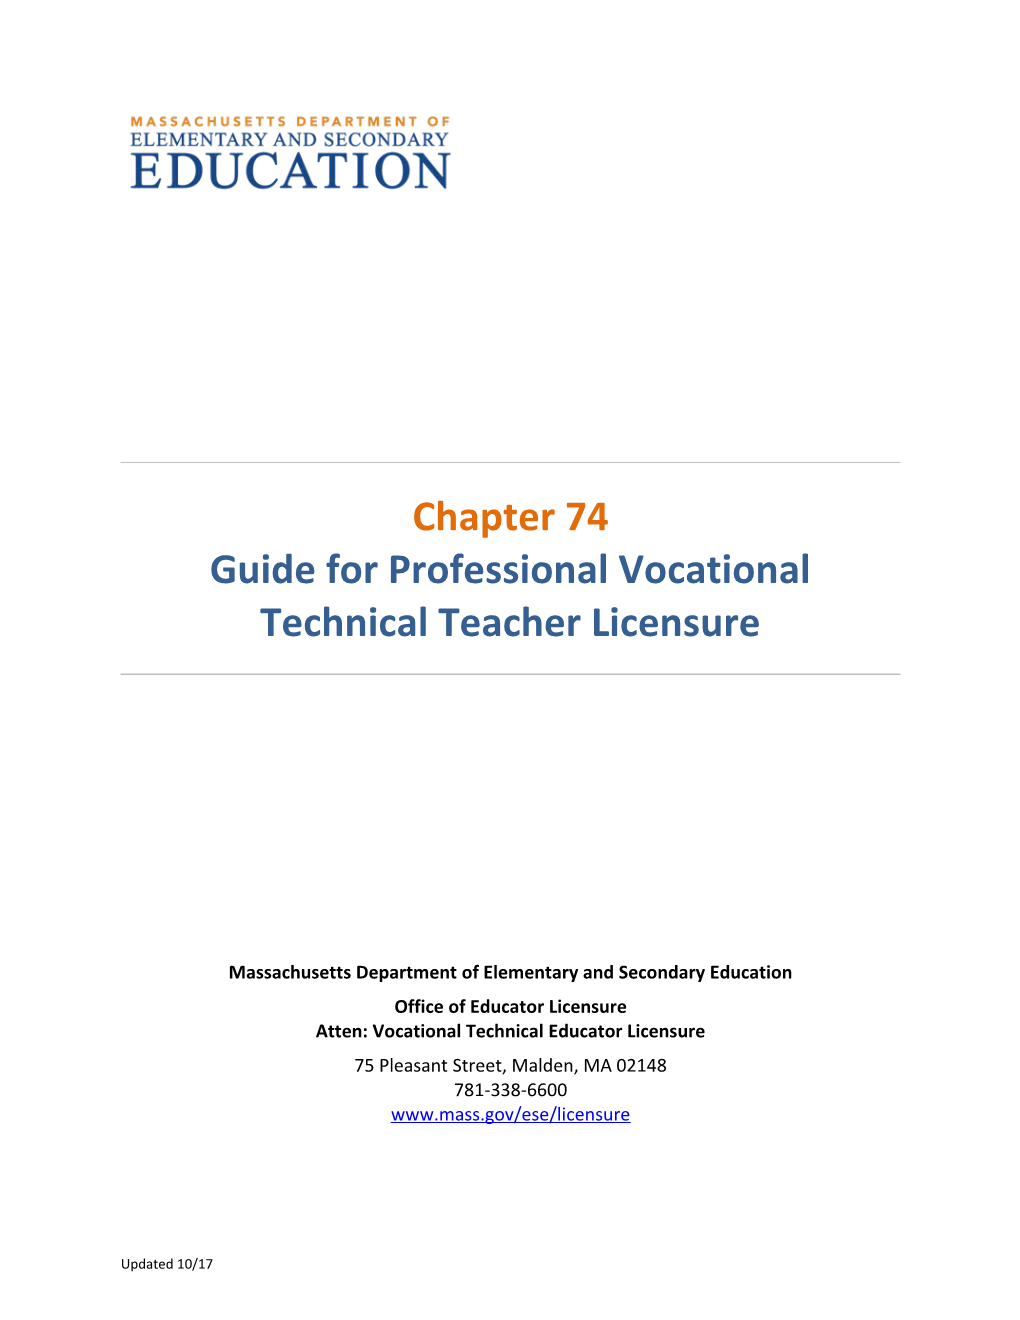 Chapter 74 Guide for Professional Vocational Technical Teacher Licensure